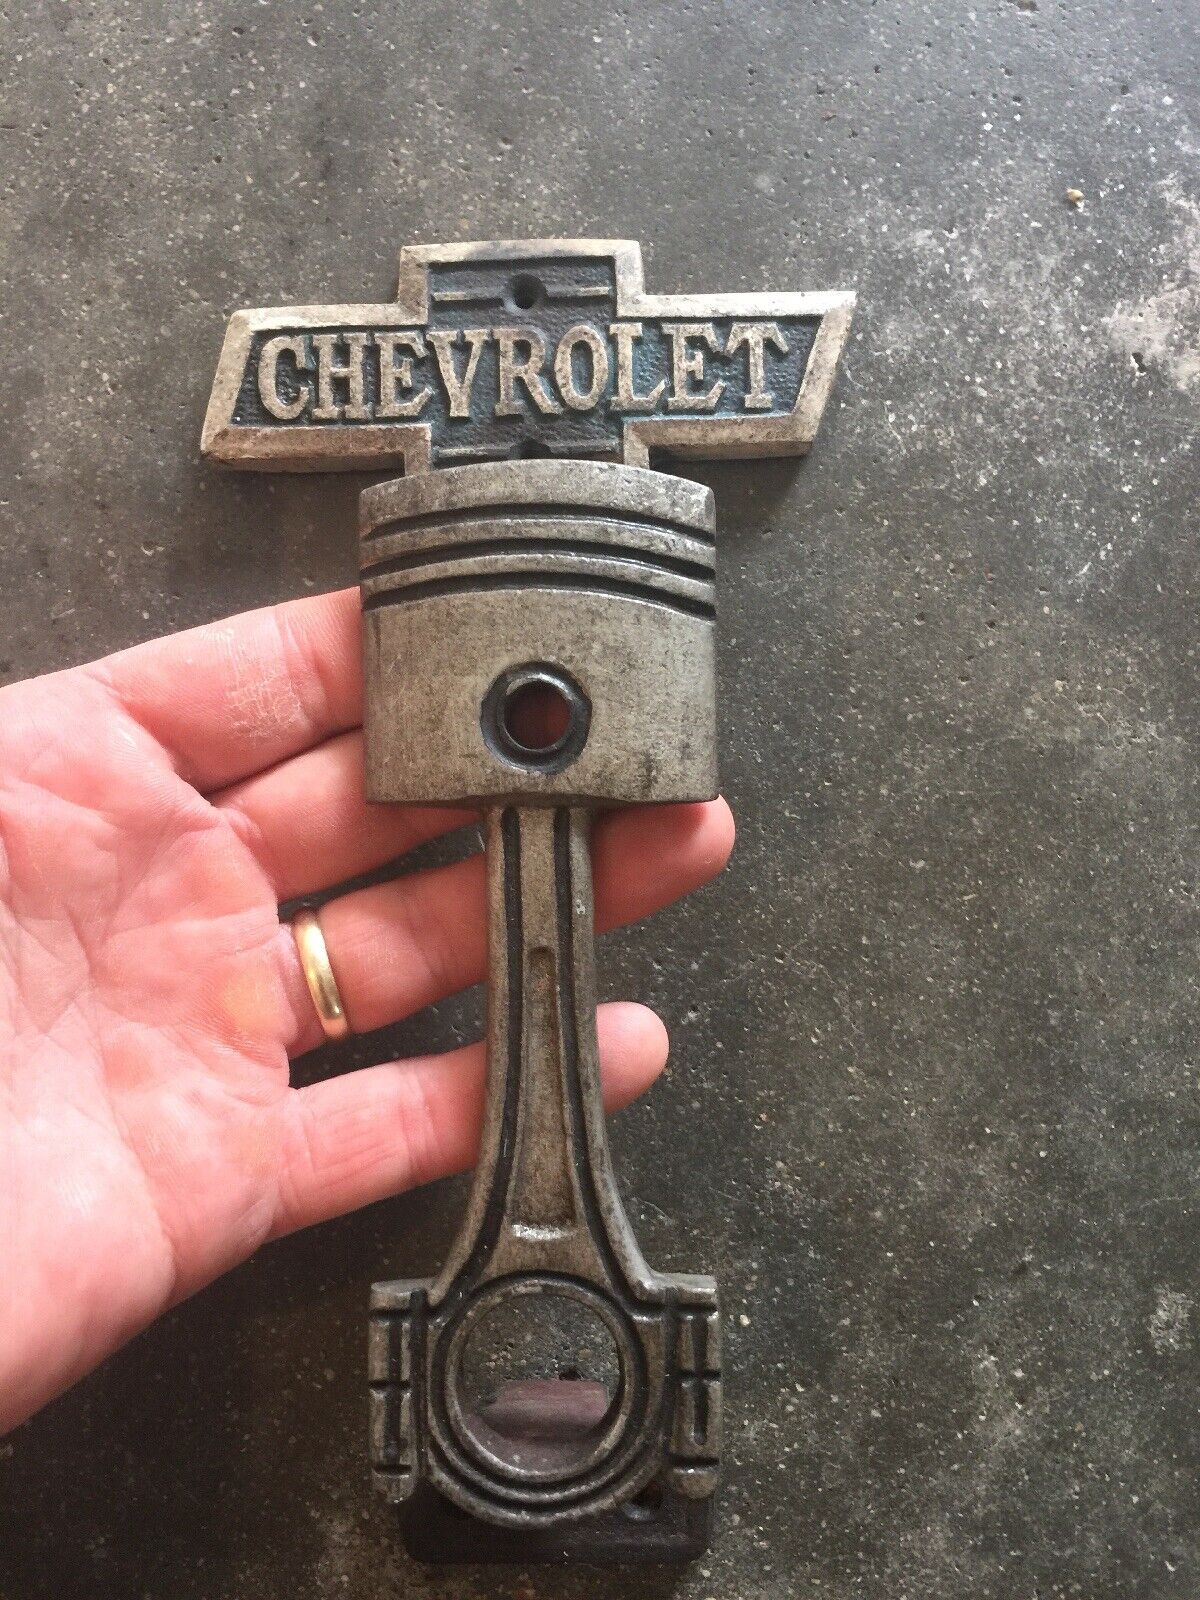 Chevrolet Chevy Cast Iron Door Handle 9INCH Patina Collector Auto Car Truck GIFT